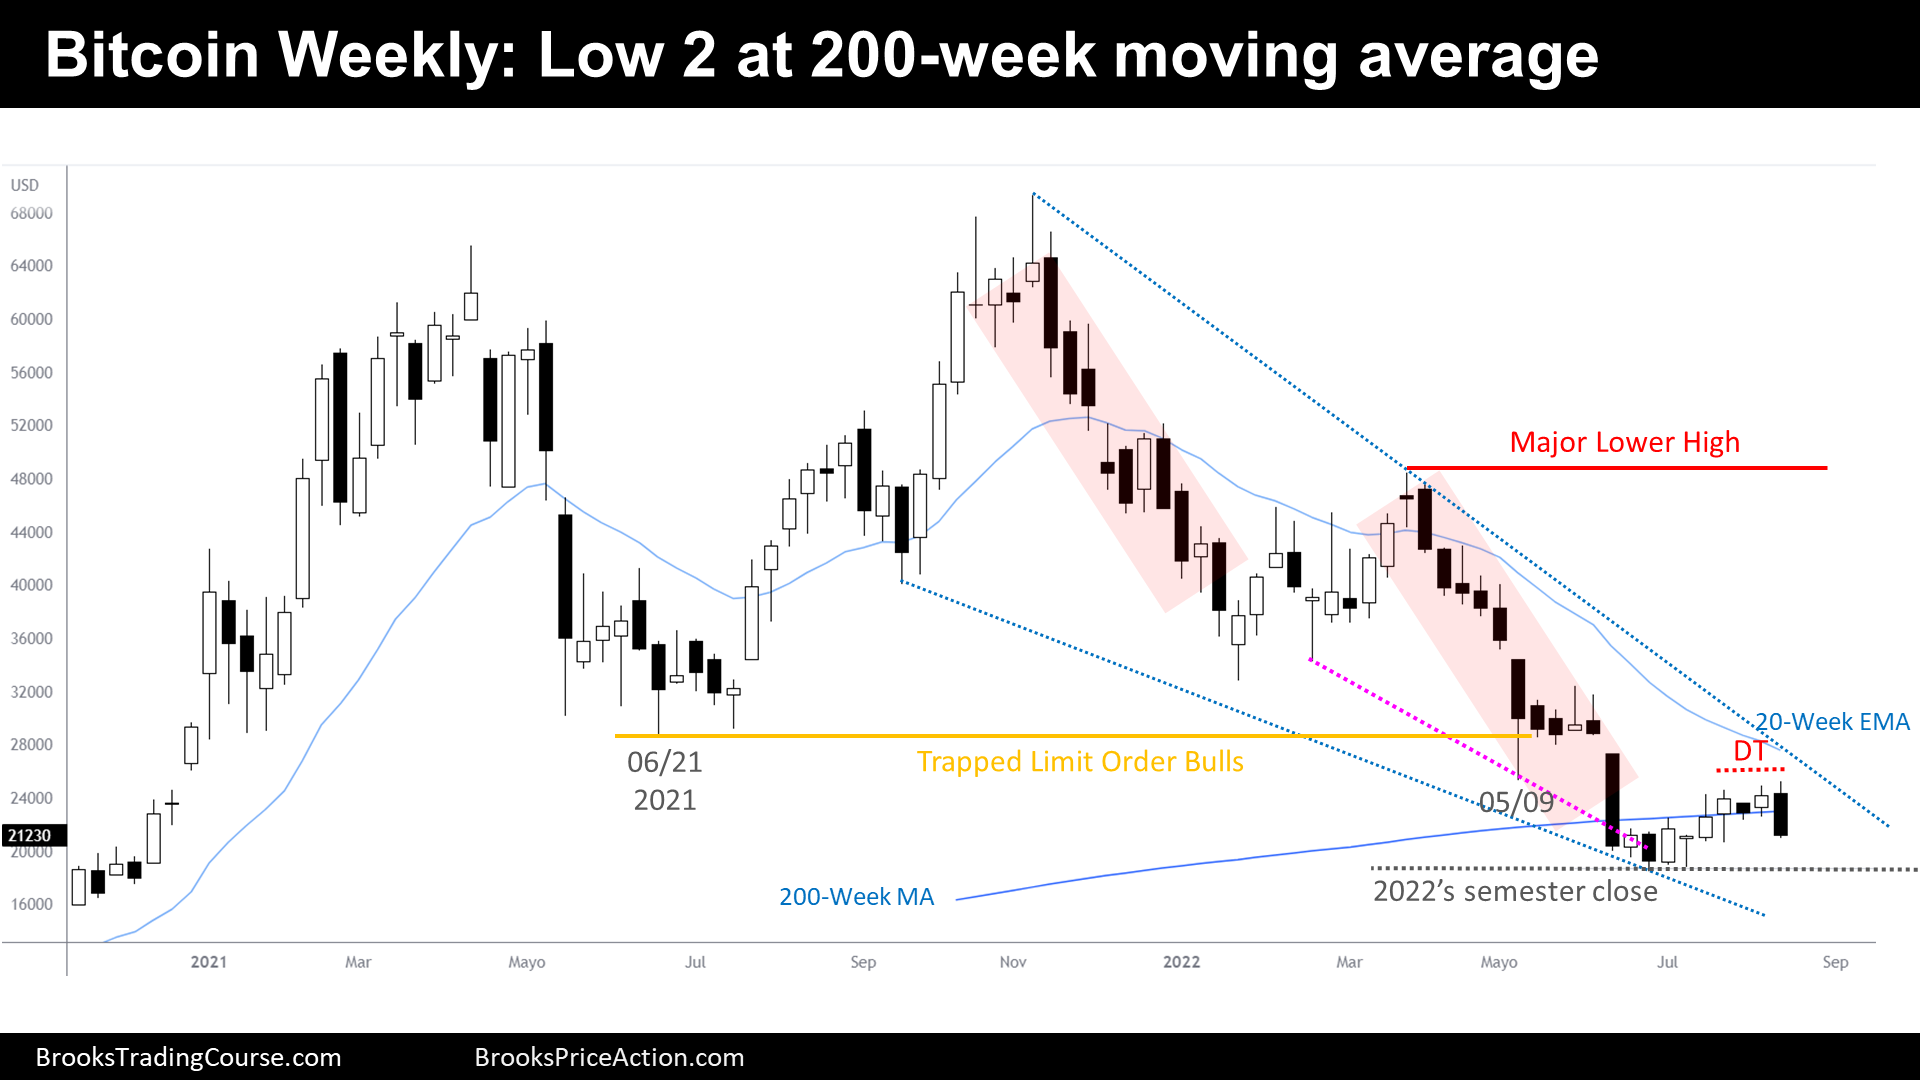 Bitcoin Bear Trend Resumption Attempt with Low 2 at 200-week Moving Average on Weekly Chart